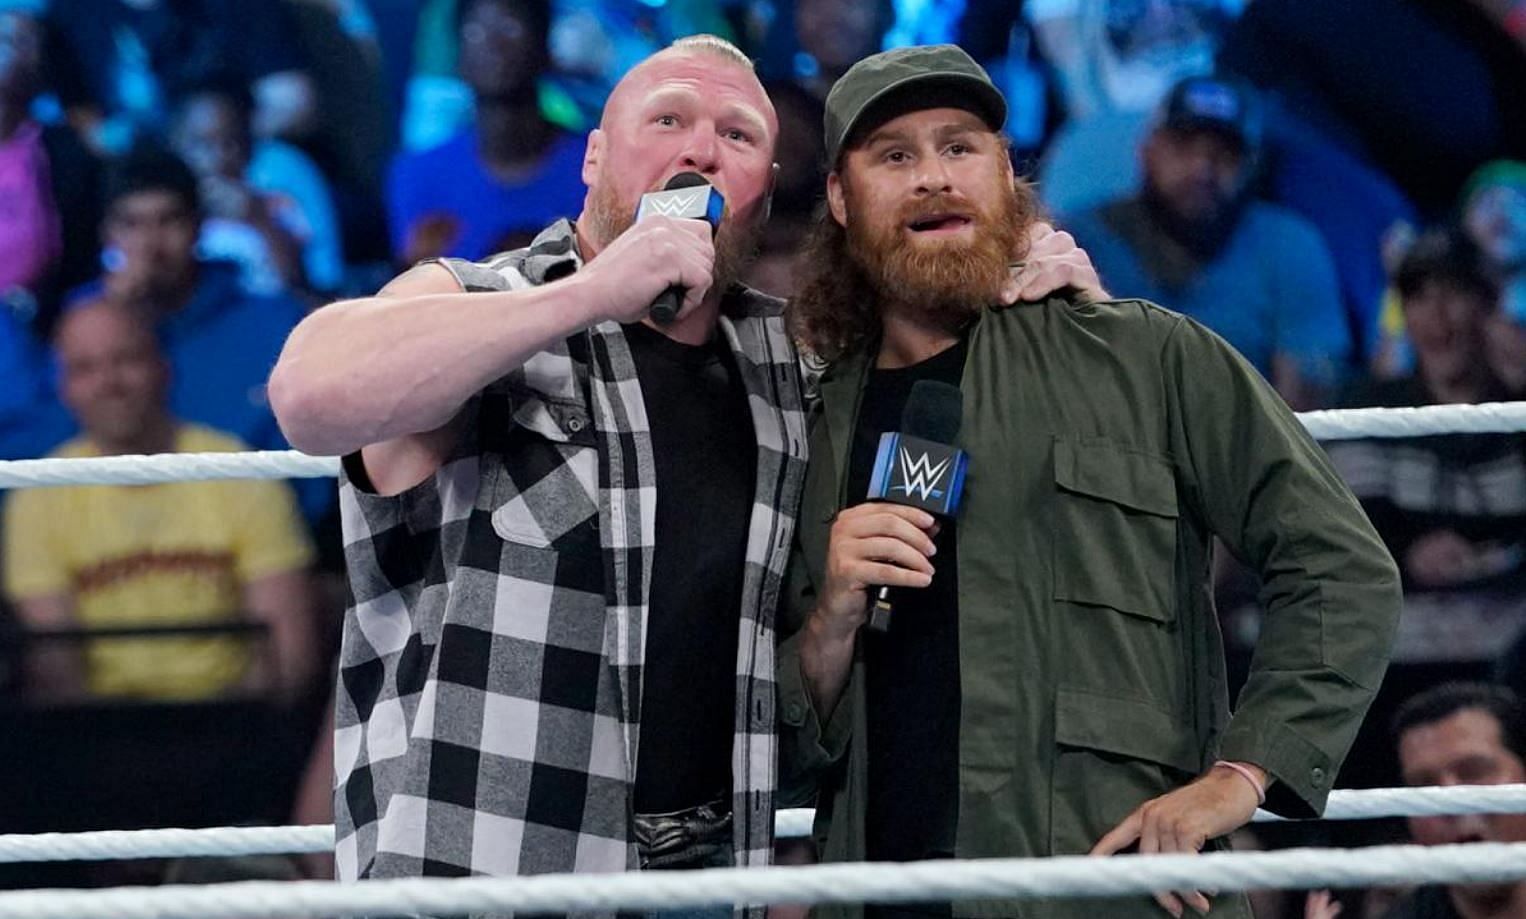 Two Canadian friends on SmackDown